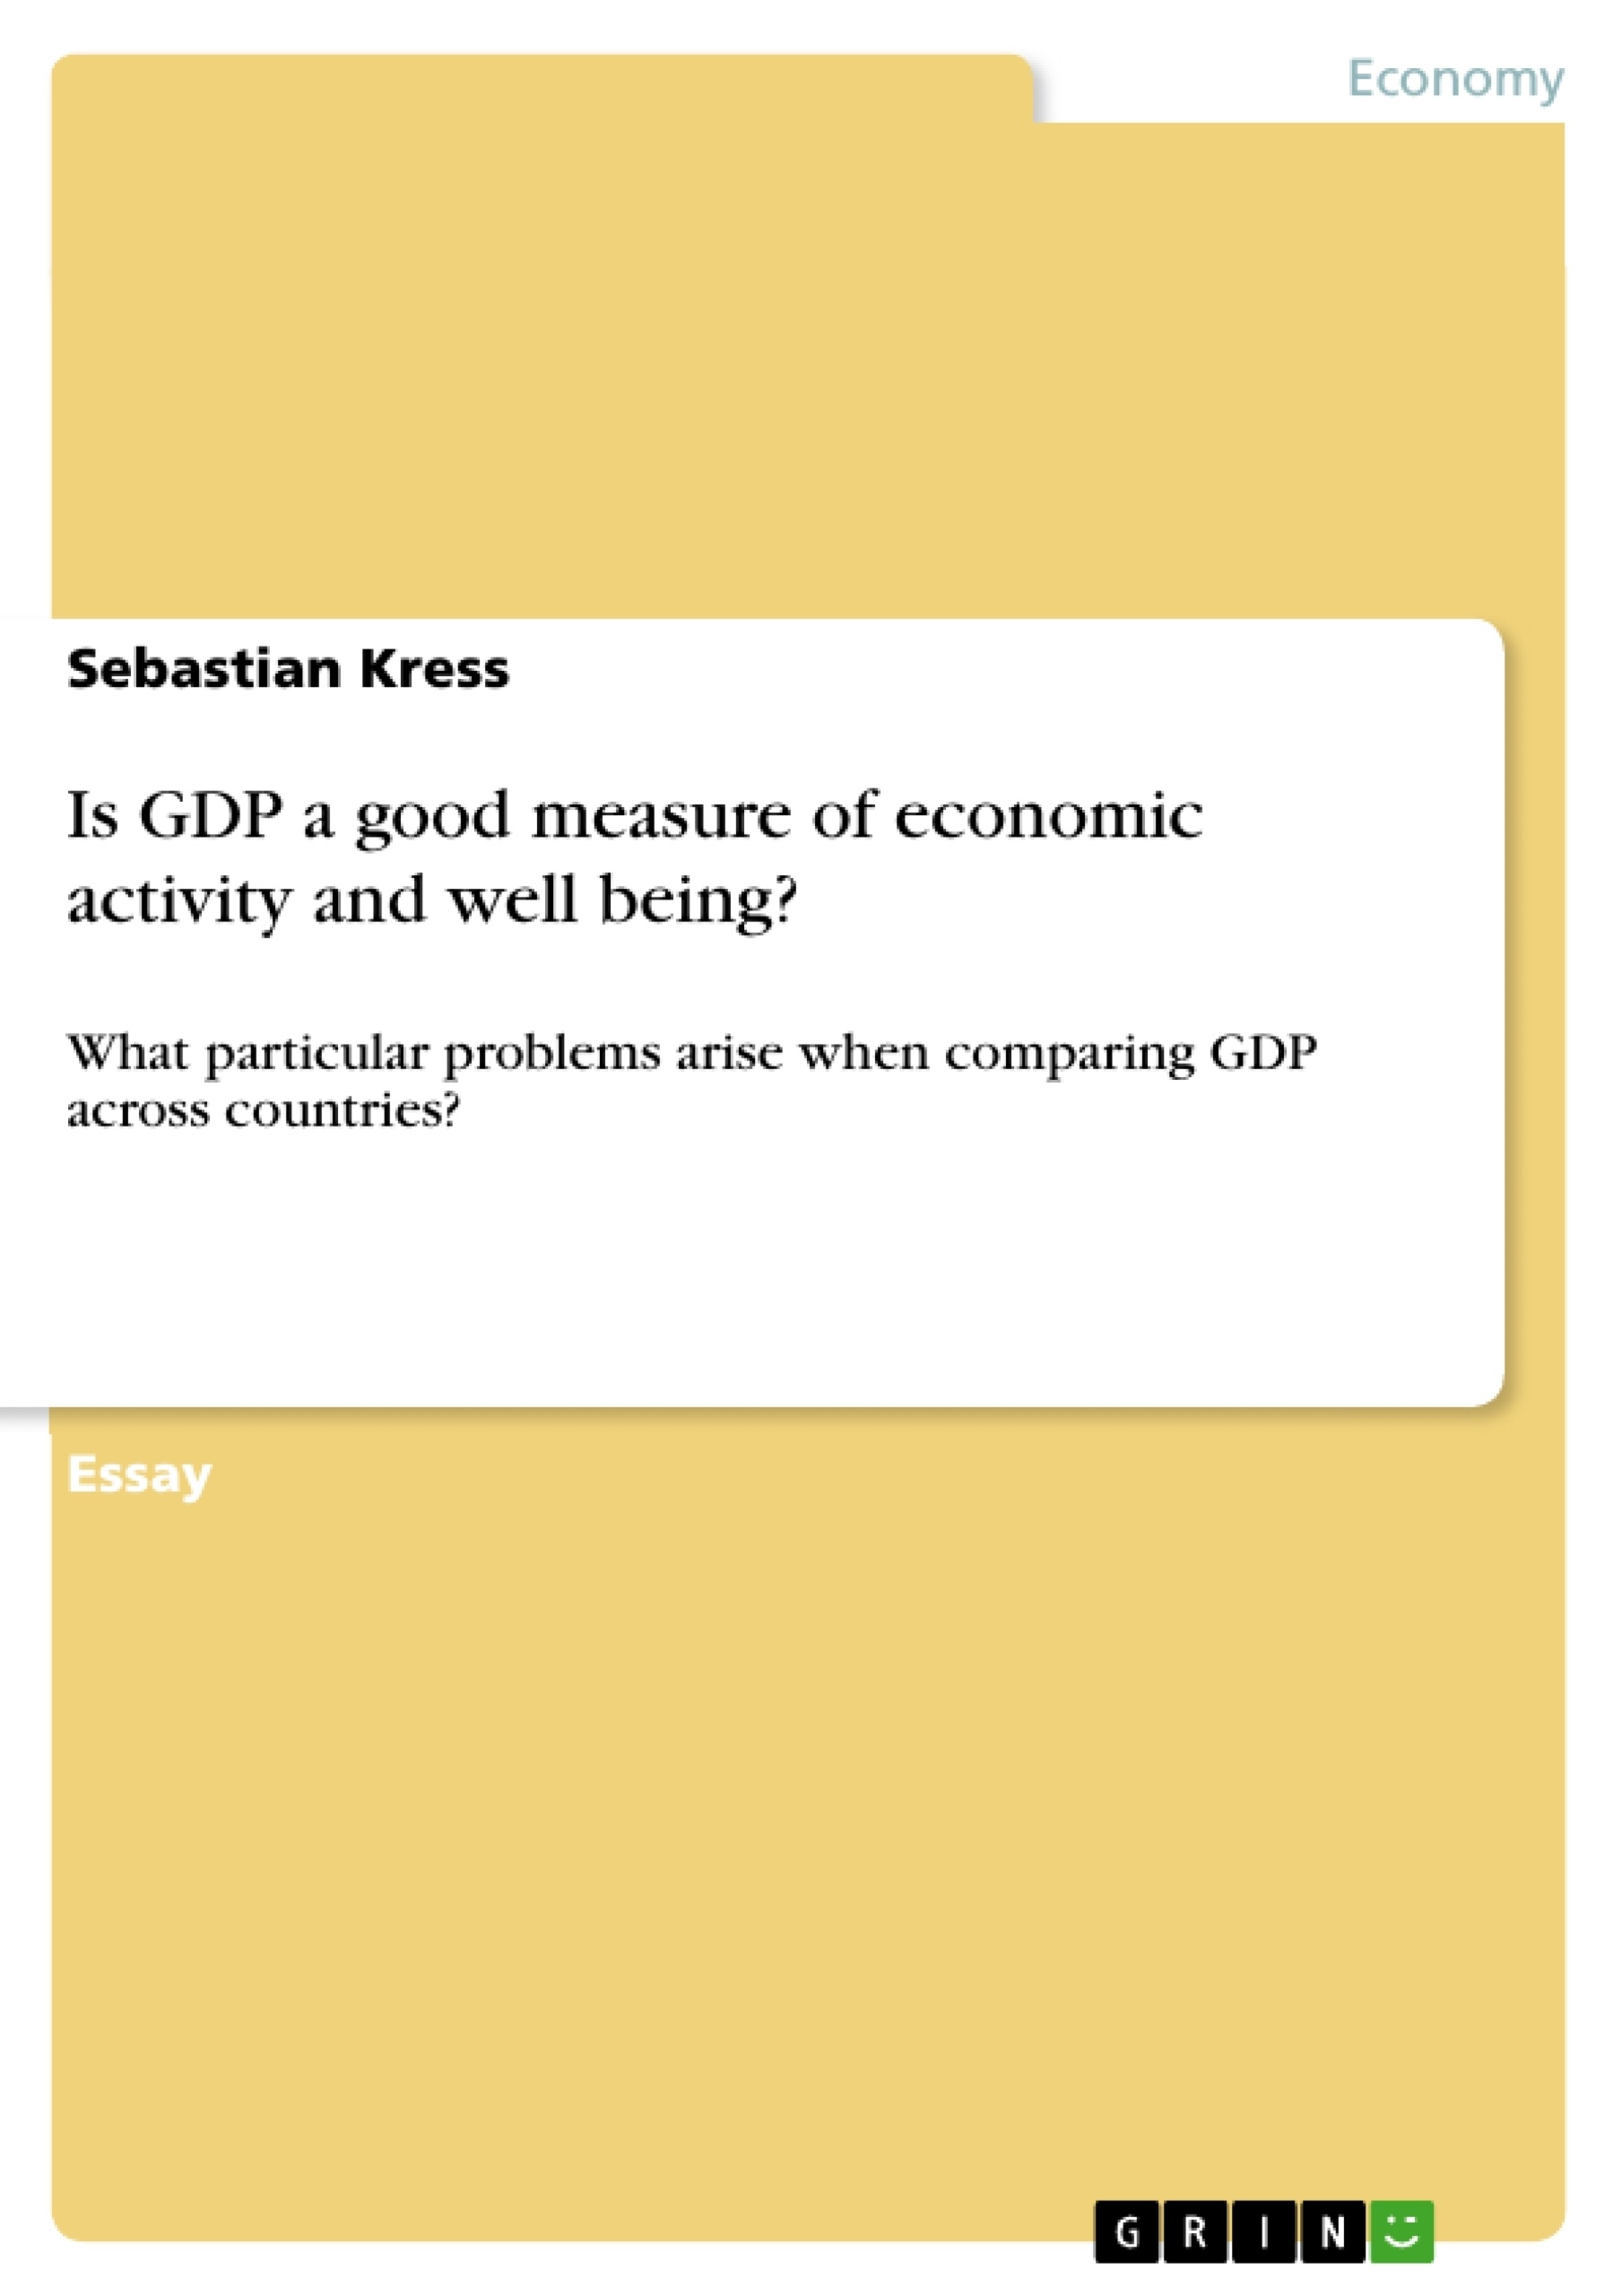 Title: Is GDP a good measure of economic activity and well being? 